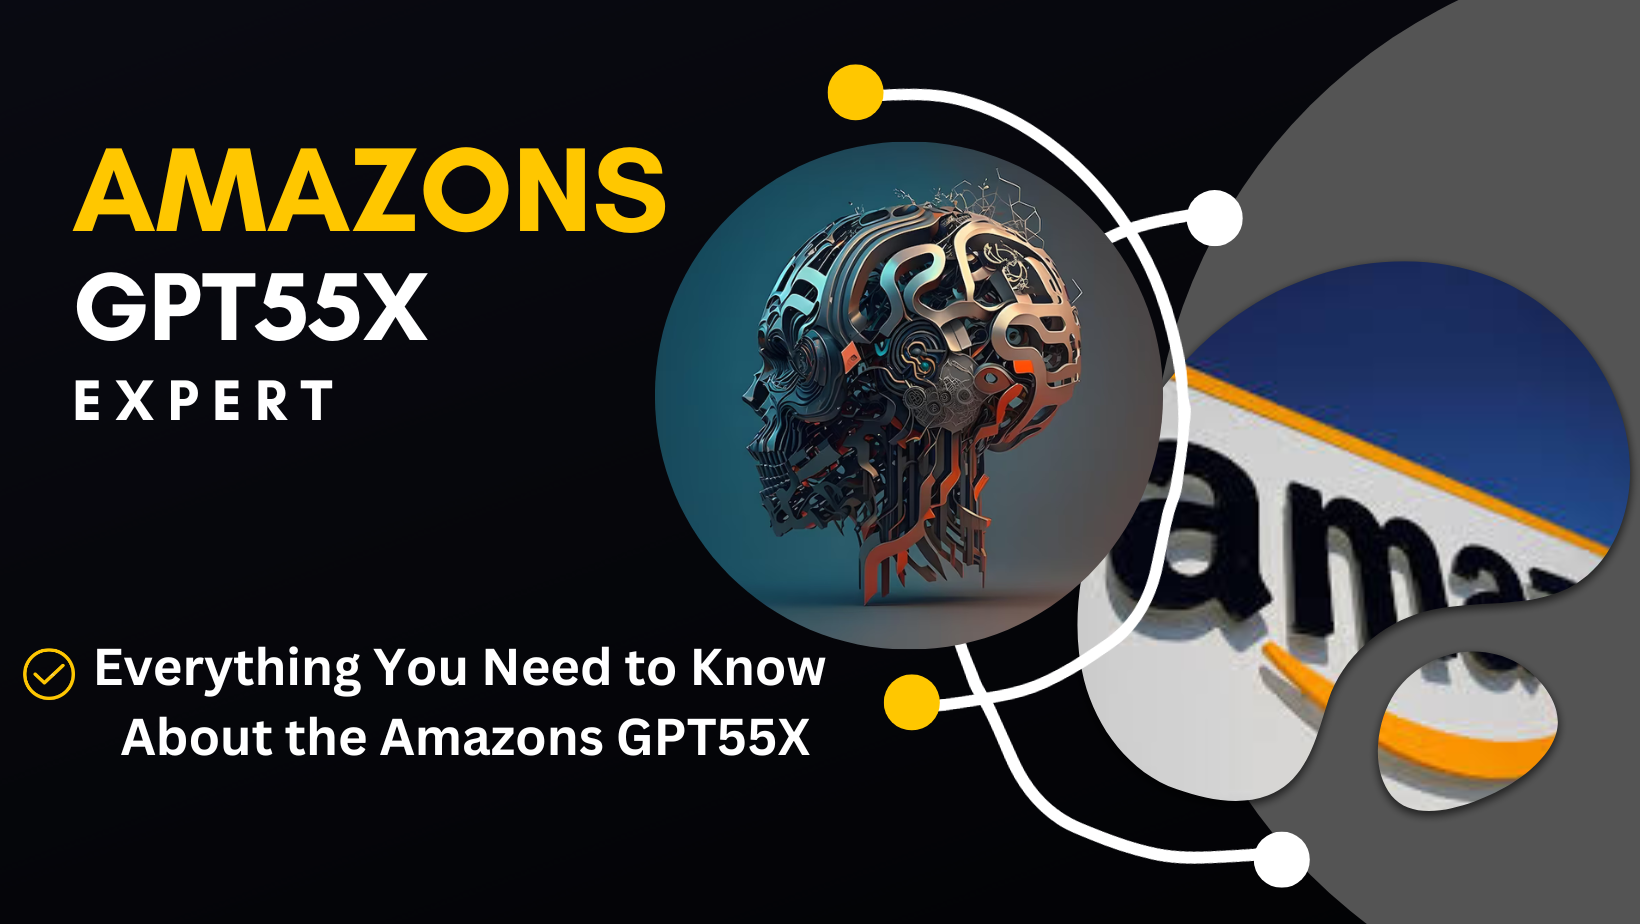 Everything You Need to Know About the Amazons GPT55X